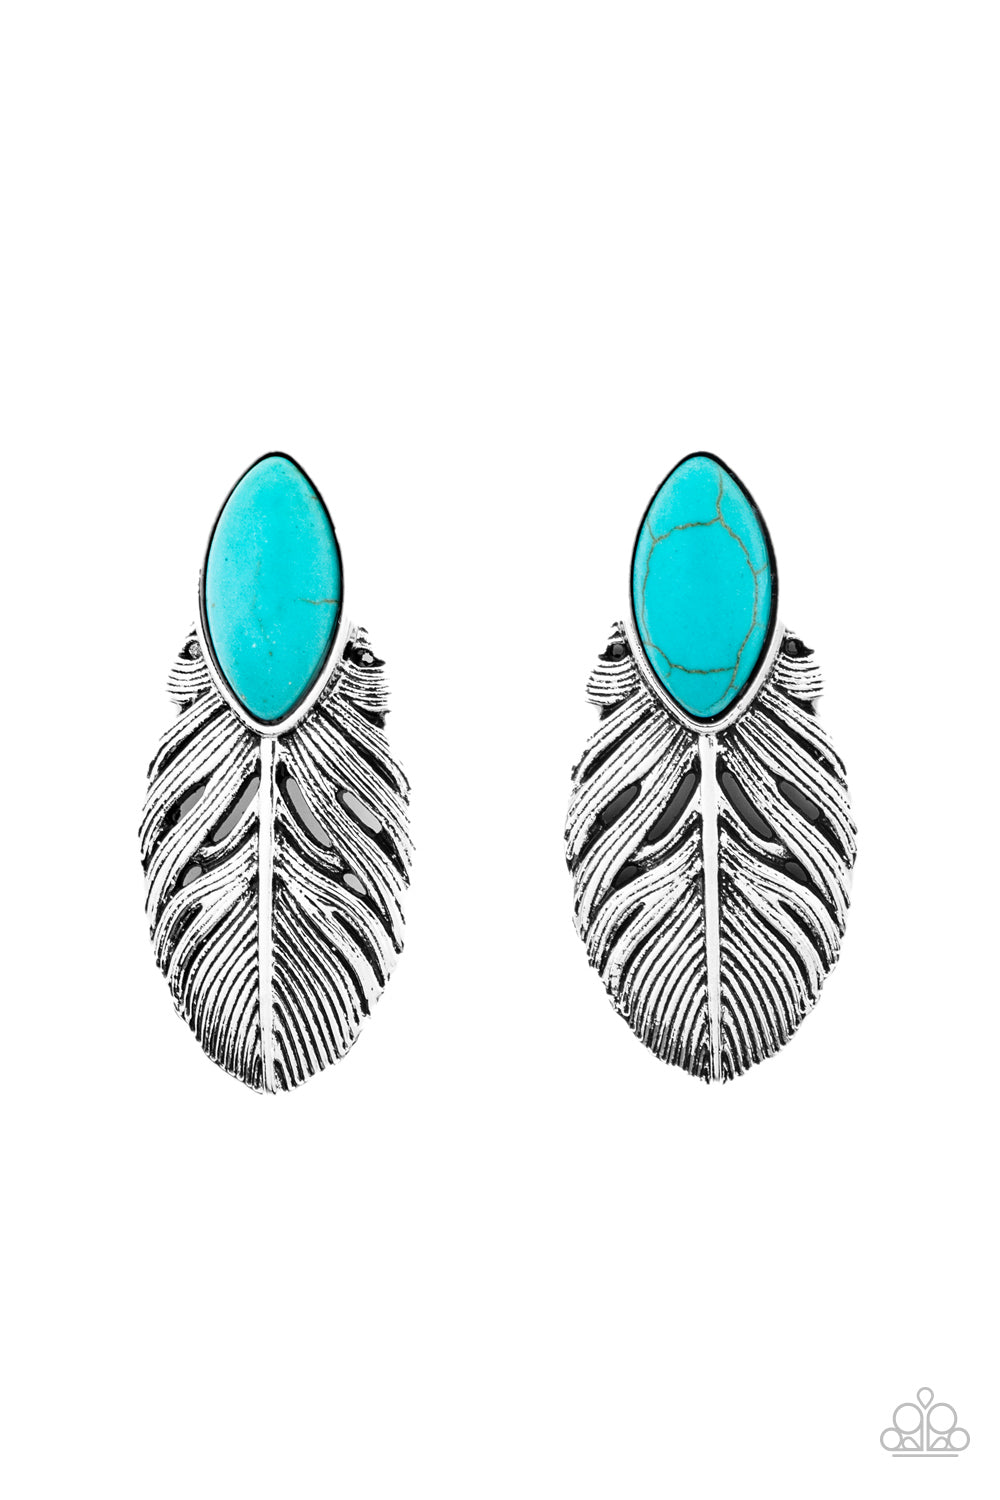 Chiseled into a tranquil marquise shape, a refreshing turquoise stone is pressed into the top of an antiqued silver frame for a seasonal look. Earring attaches to a standard post fitting.